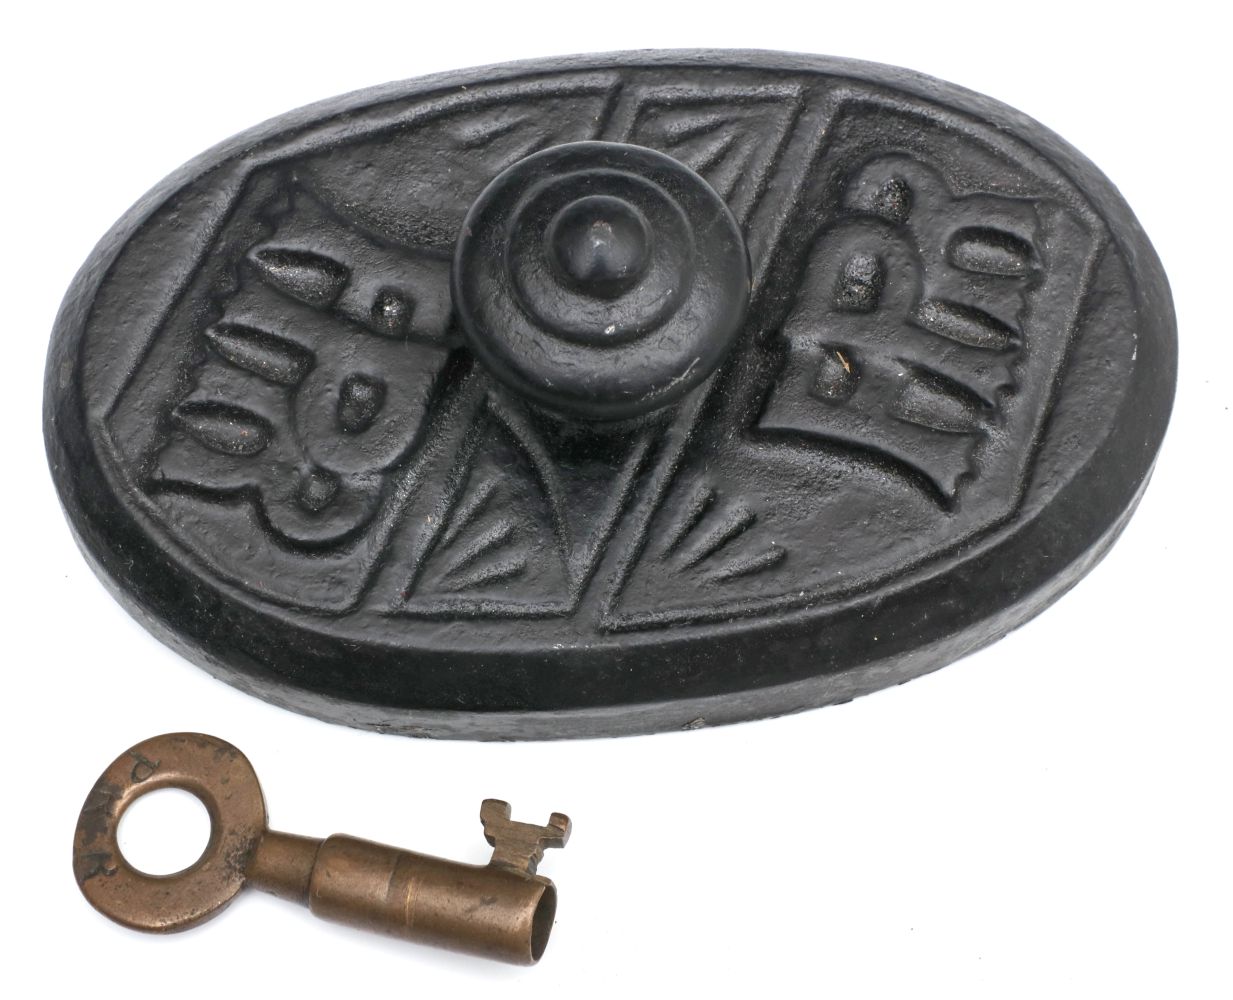 PENNSYLVANIA RAILROAD IRON PAPERWEIGHT AND TAPERED KEY